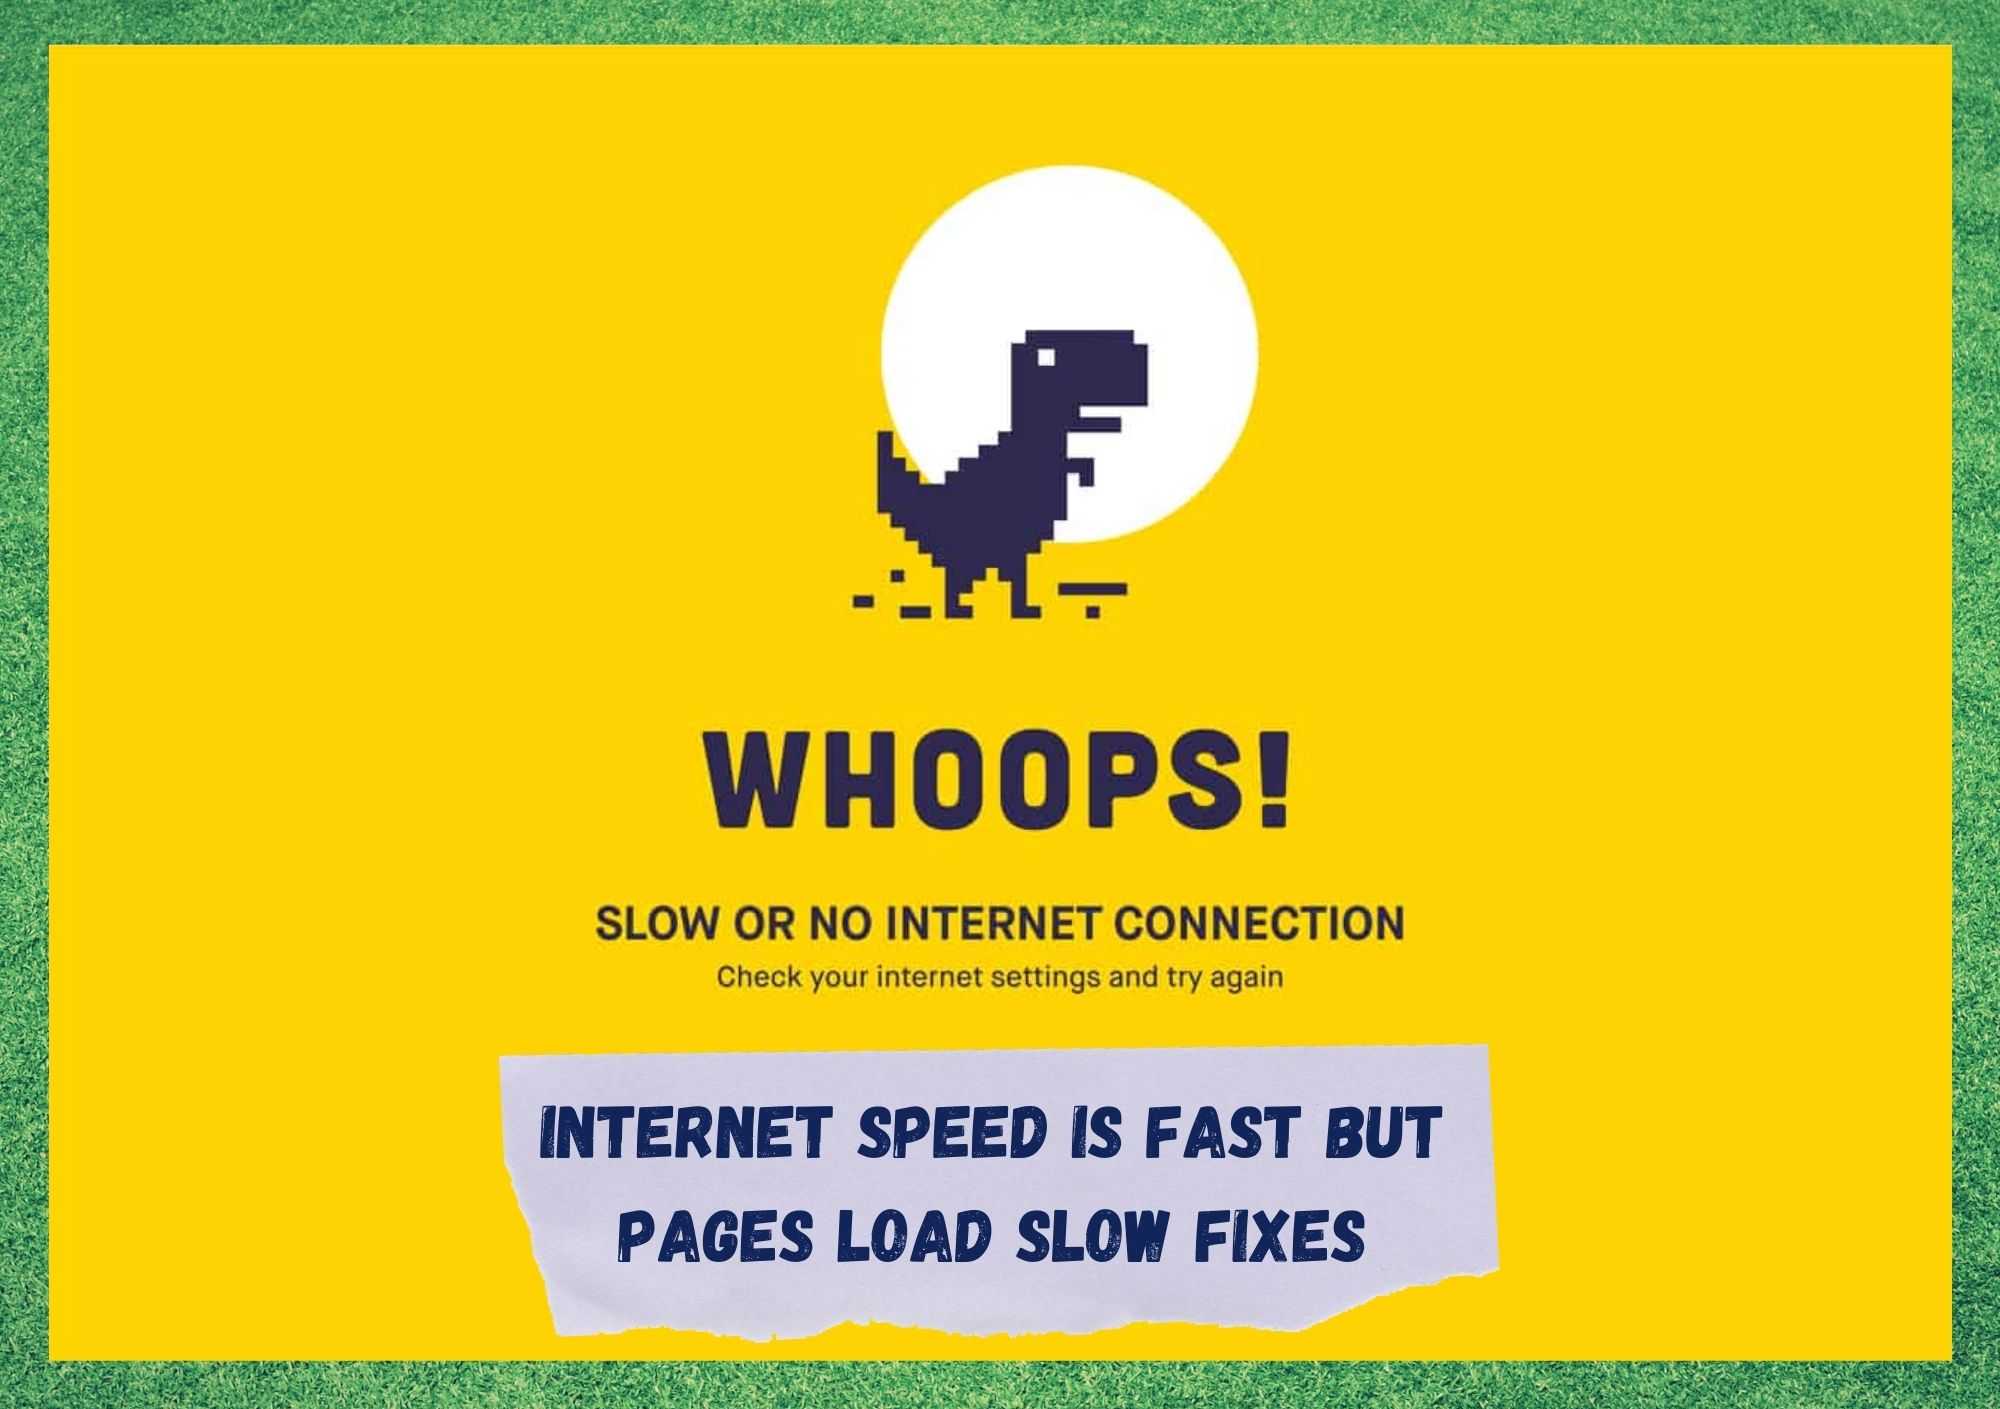 internet speed is fast but pages load slow